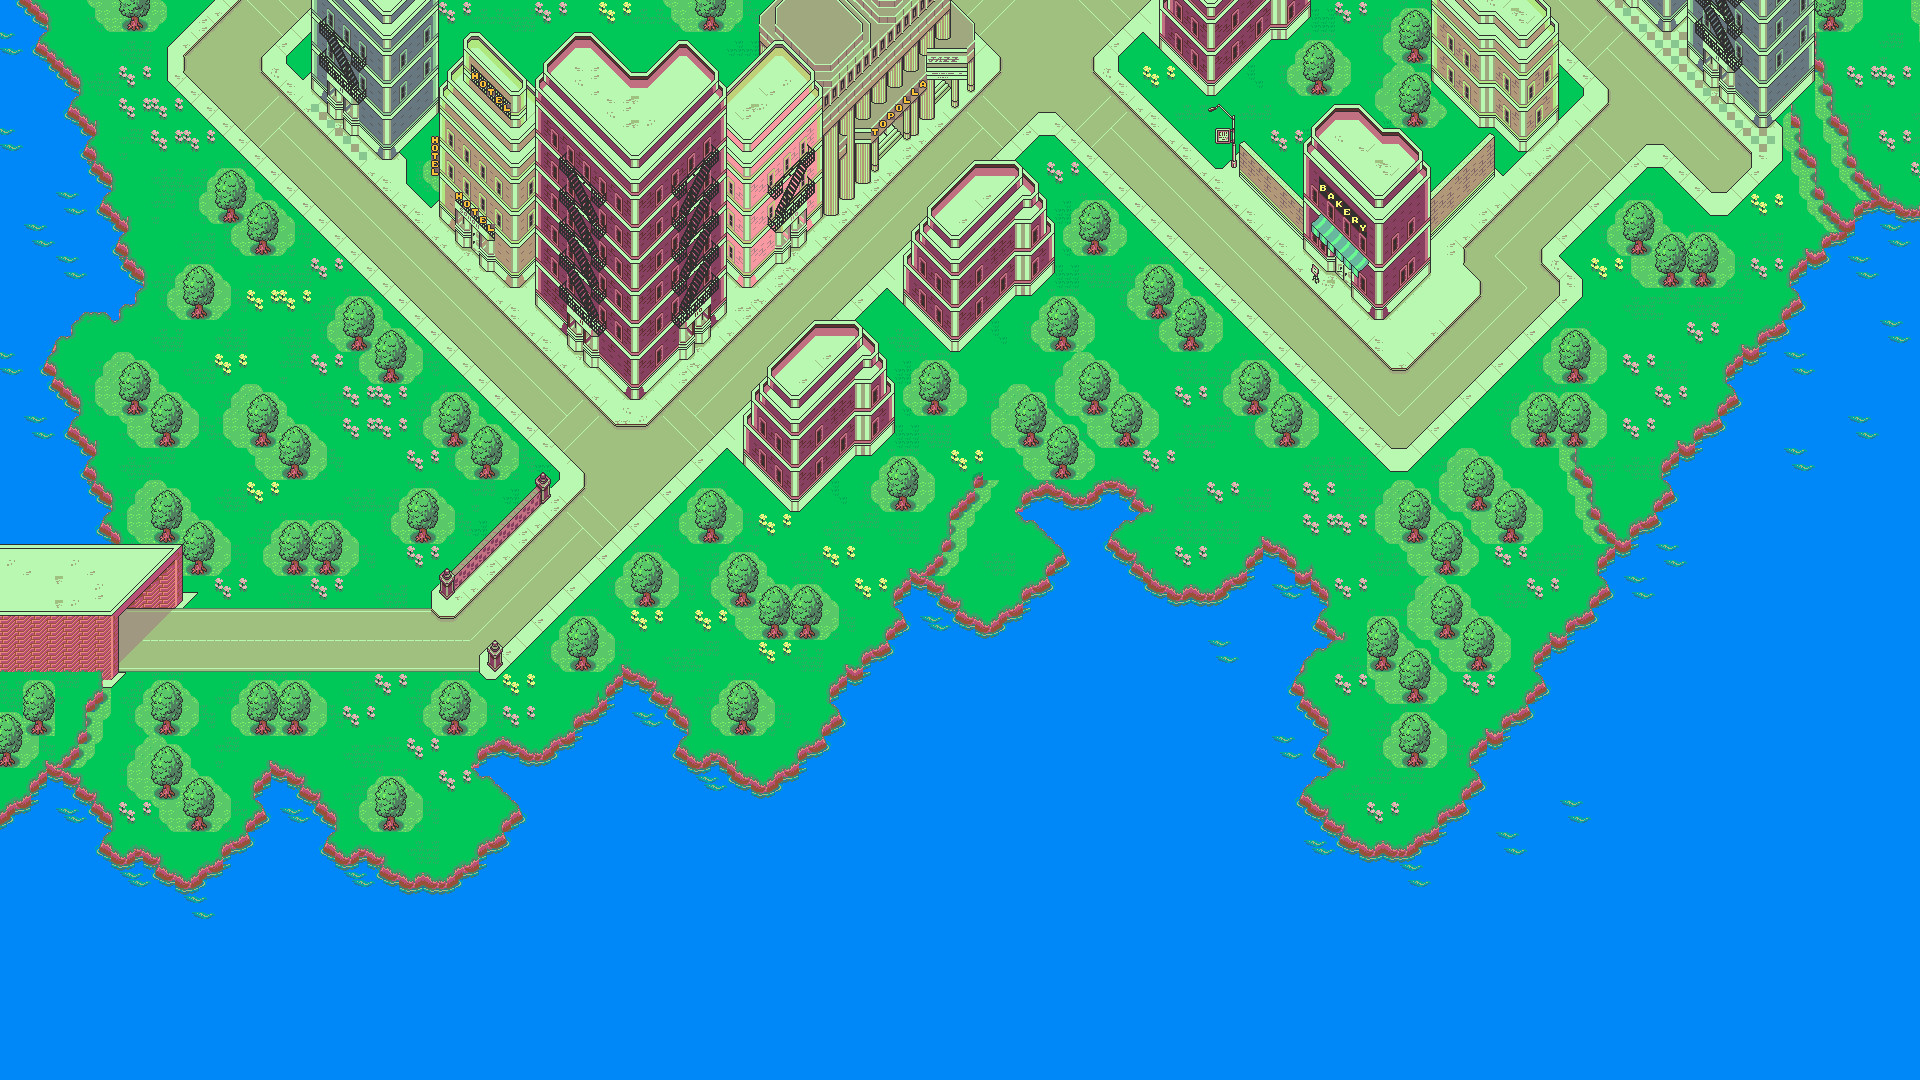 1920x1080 EarthBound HD Wallpaper | Background Image |  | ID:333603 -  Wallpaper Abyss